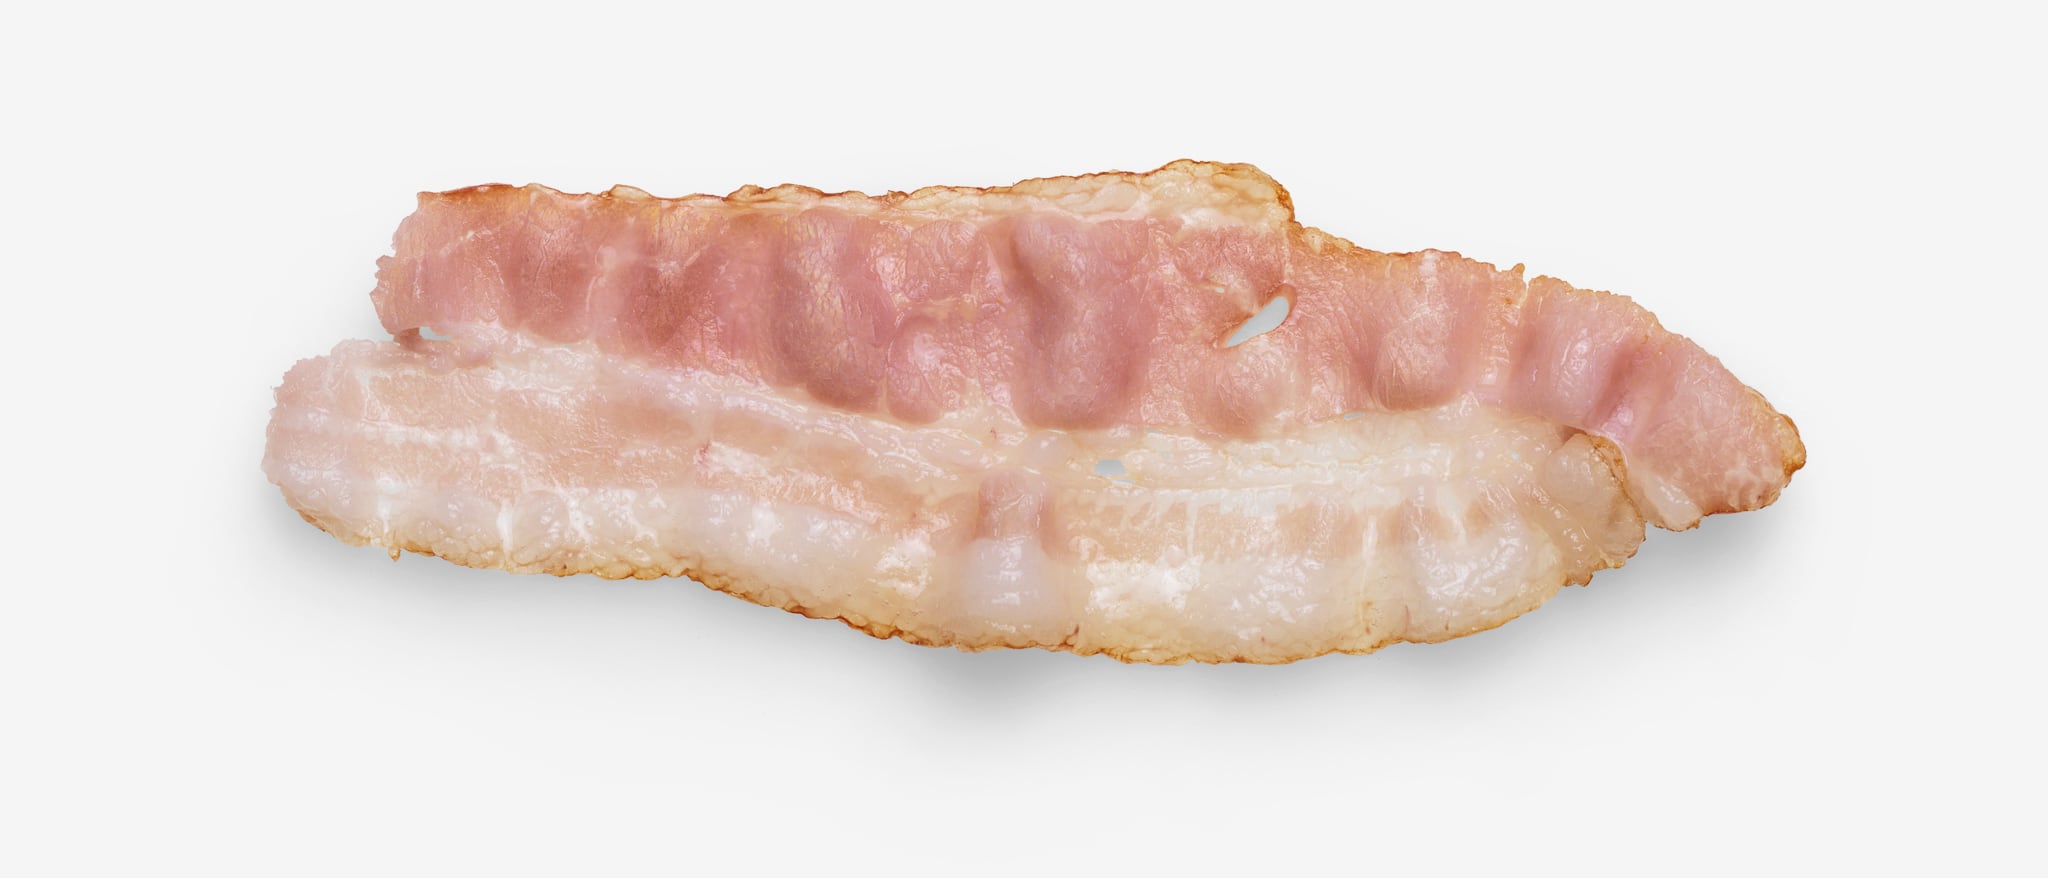 Bacon PSD image with transparent background